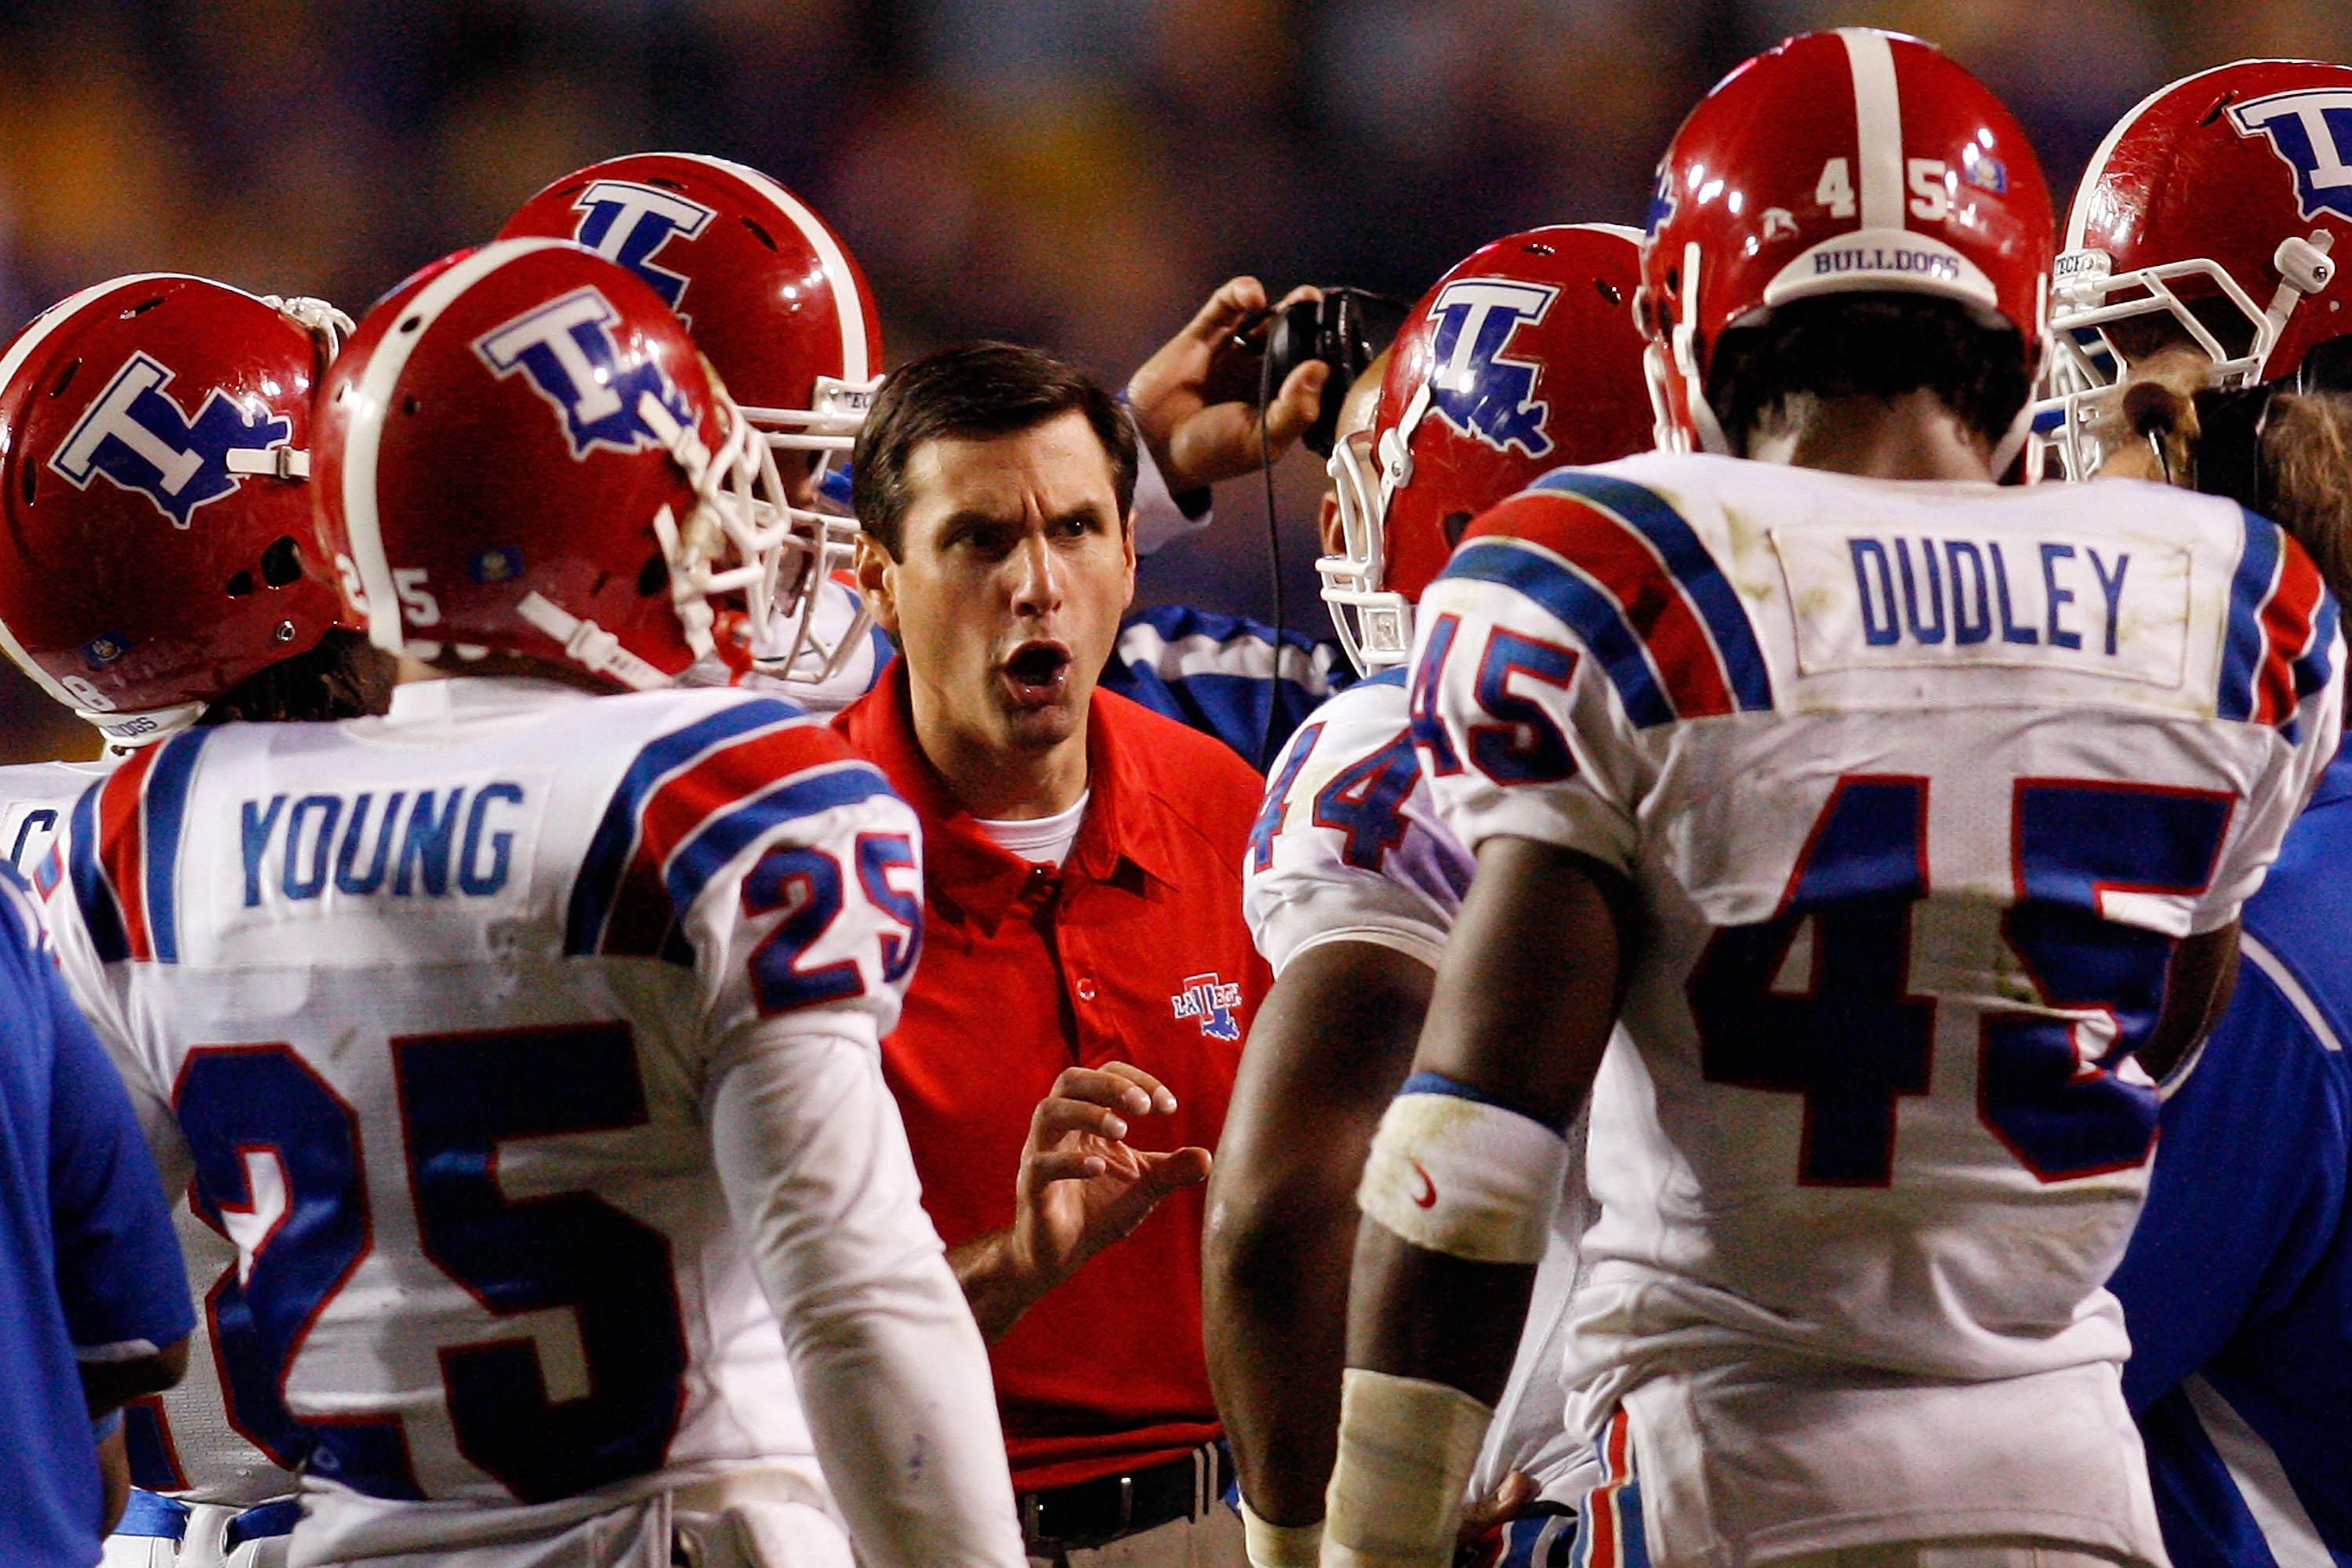 BATON ROUGE, LA - NOVEMBER 14:  Head coach Derek Dooley of the Louisiana Tech Bulldogs talks with his team during a time out in the game against the LSU Tigers at Tiger Stadium on November 14, 2009 in Baton Rouge, Louisiana.  The Tigers defeated the Bulld